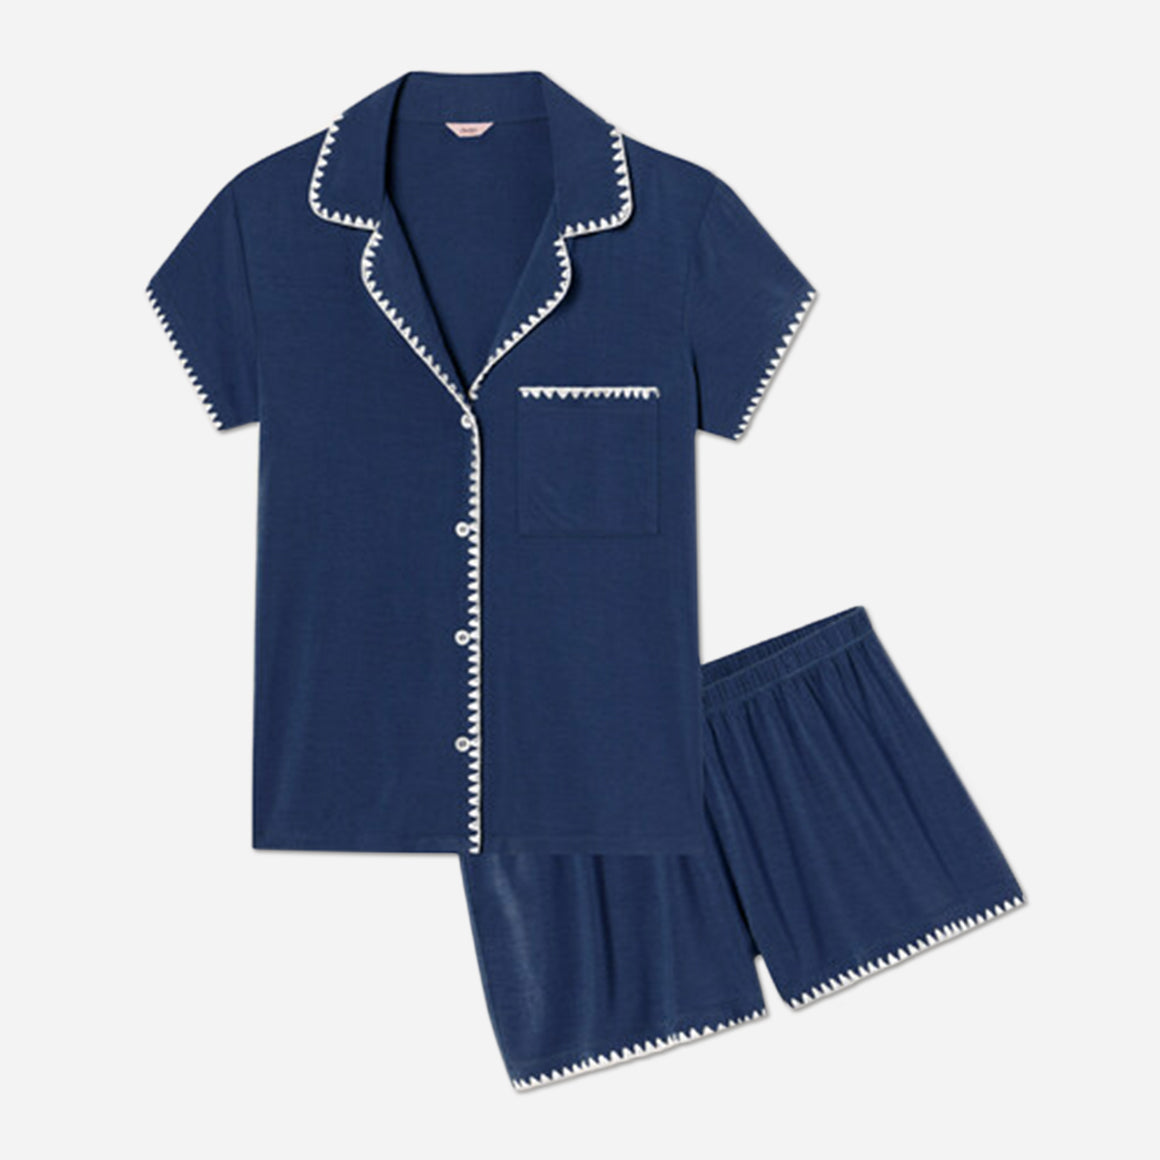 The classic slim-fit short-sleeve top boasts a button front with a notch collar and functional pocket, while the low-rise cheeky short with a thin elastic waistband ensures maximum comfort and style. Made with sustainable TENCEL™ Modal knit, this PJ set feels luxuriously soft and drapes gently over the body.